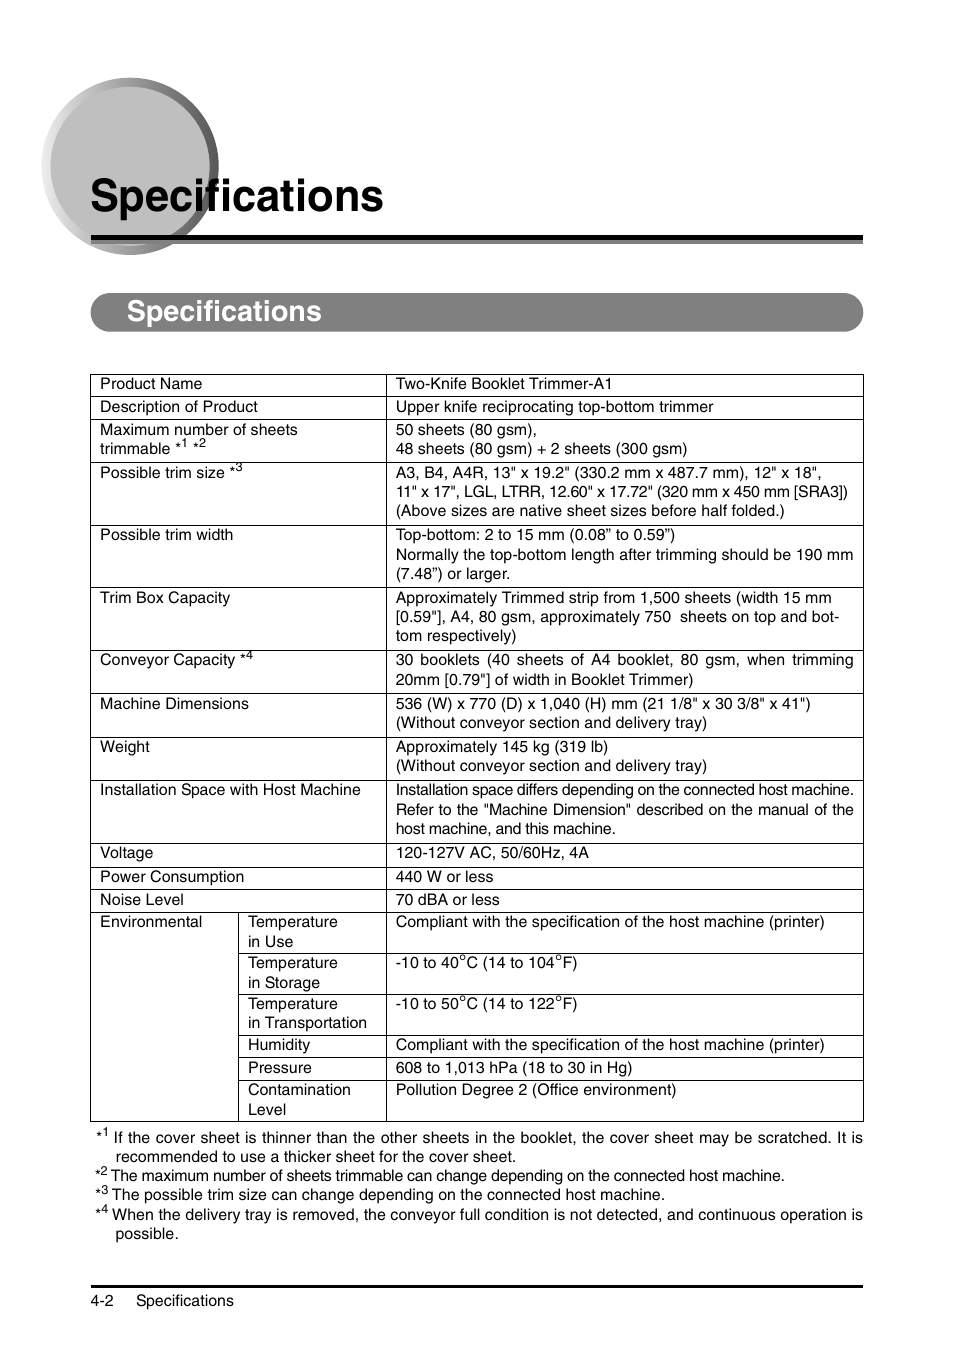 Specifications, Specifications -2 | Canon Trimmer User Manual | Page 23 / 26